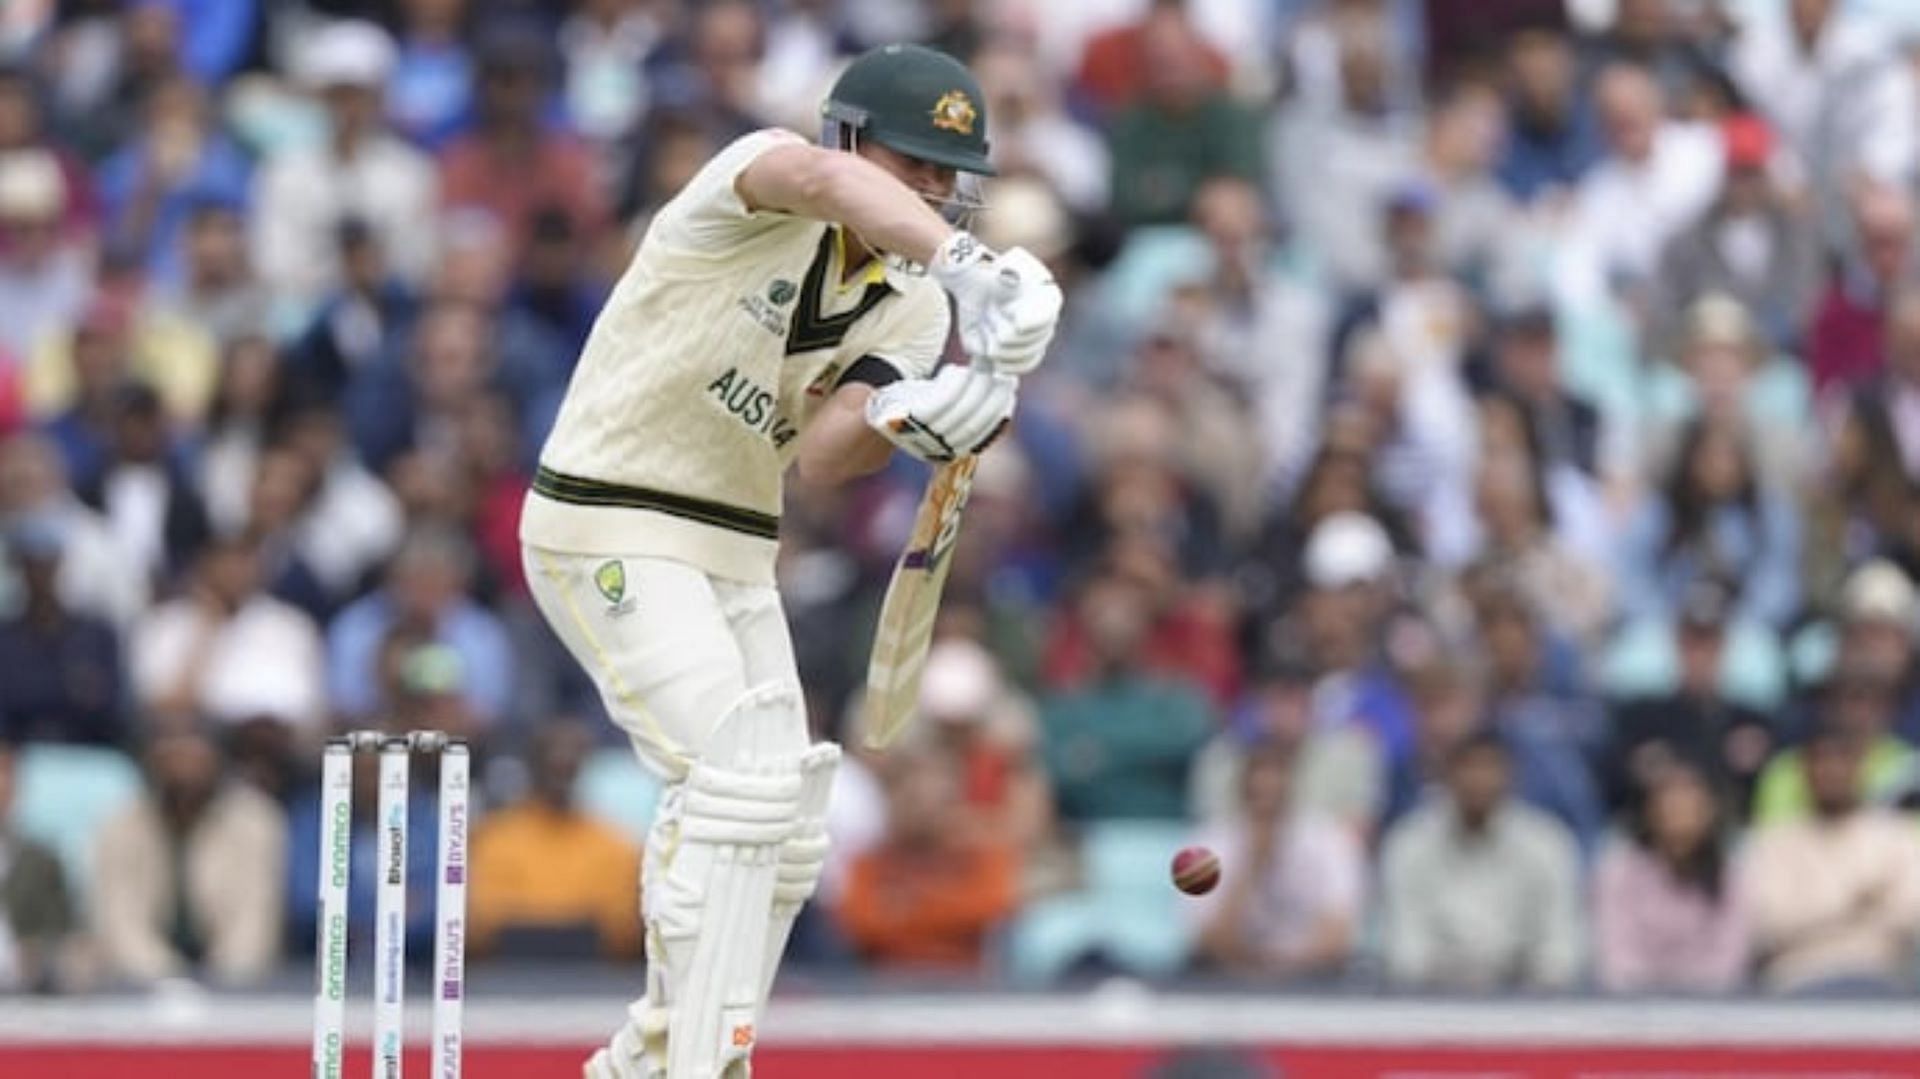 Warner has displayed great resolve in a couple of innings this English summer.